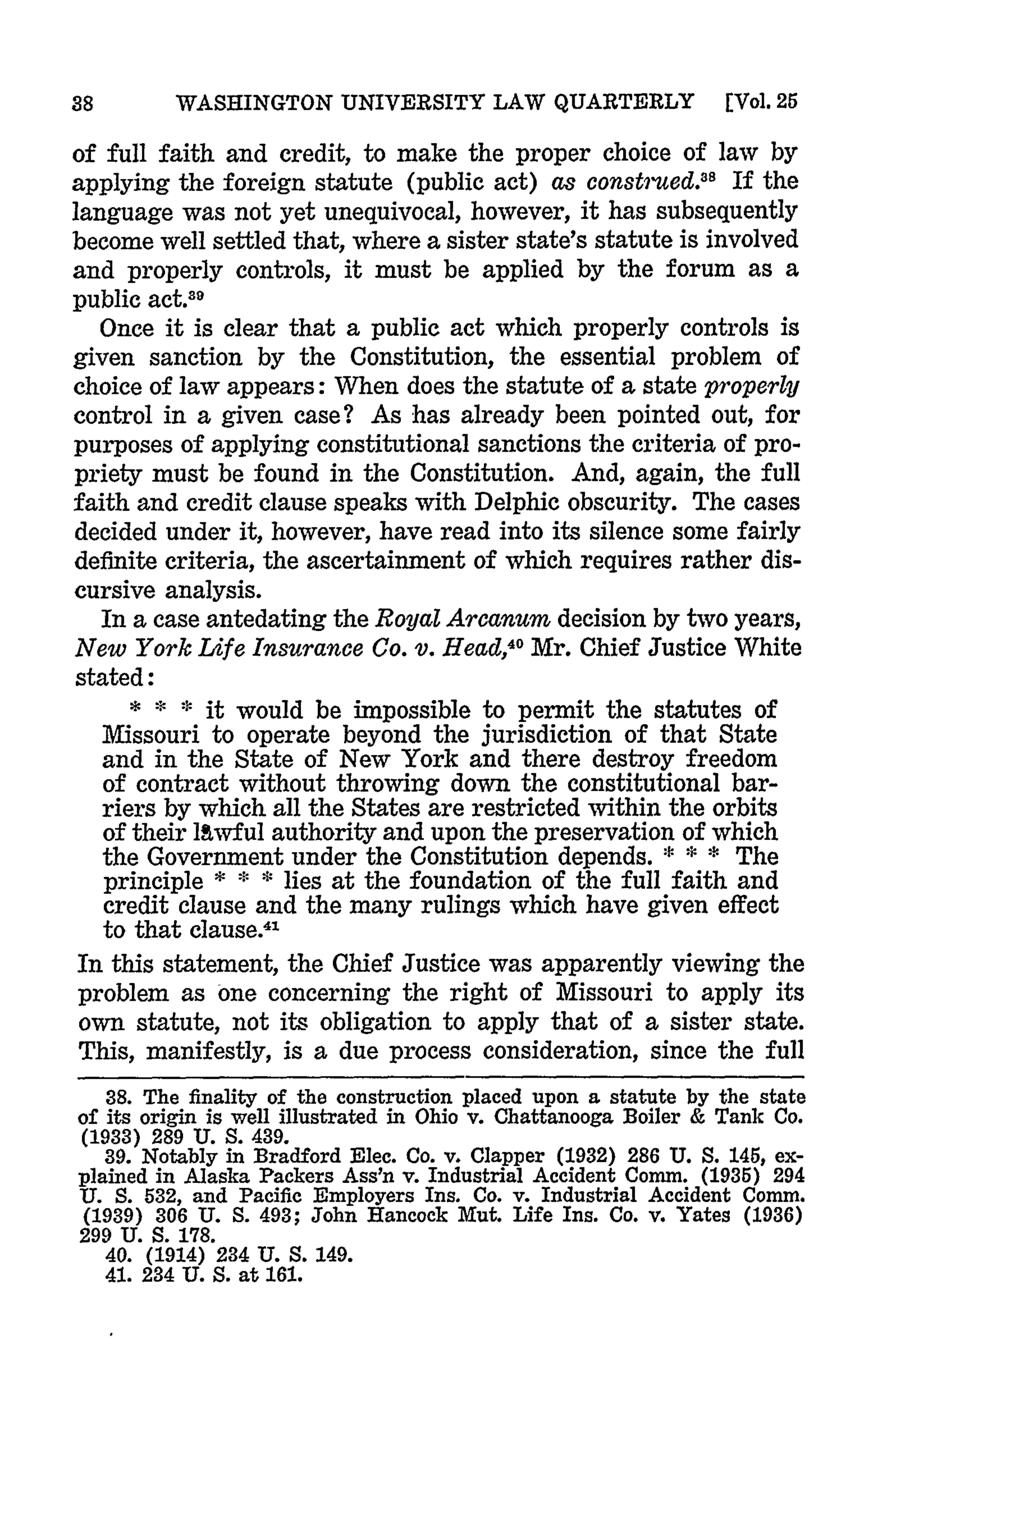 38 WASHINGTON UNIVERSITY LAW QUARTERLY [Vol. 25 of full faith and credit, to make the proper choice of law by applying the foreign statute (public act) as construed.